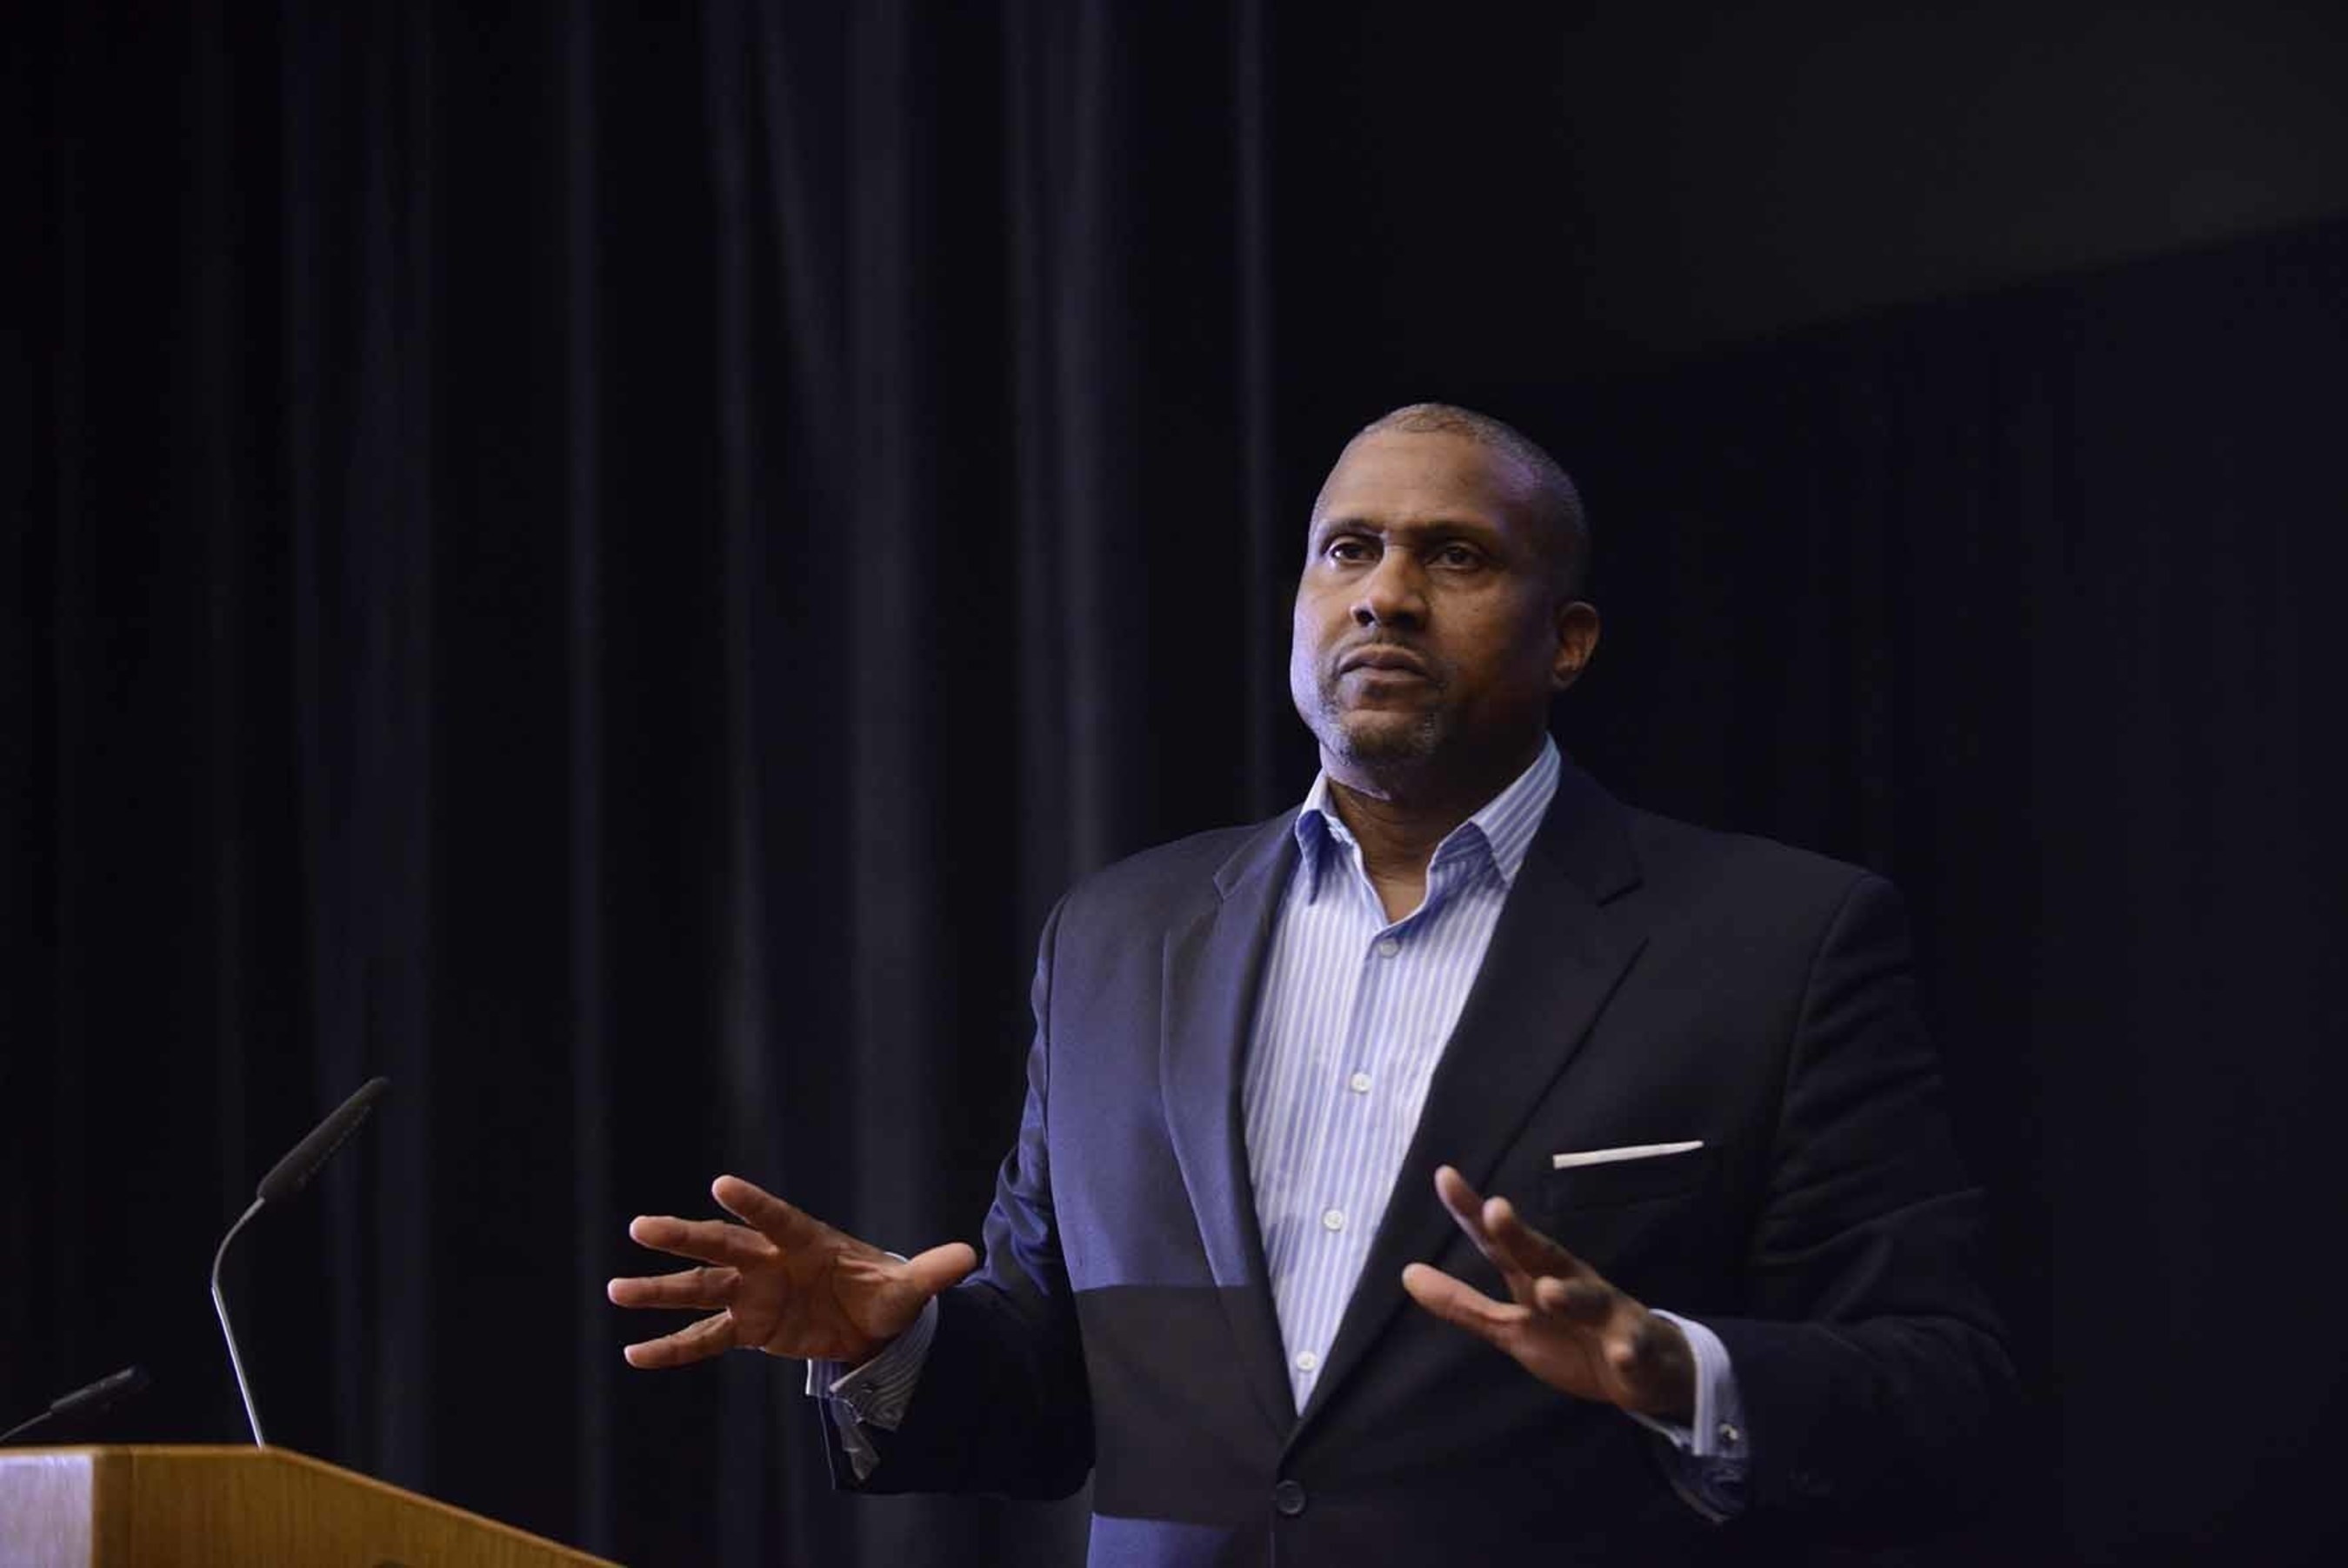 Talk show host and bestselling author Tavis Smiley speaking at the Bunker Hill Community College Compelling Conversations Speaker Series.